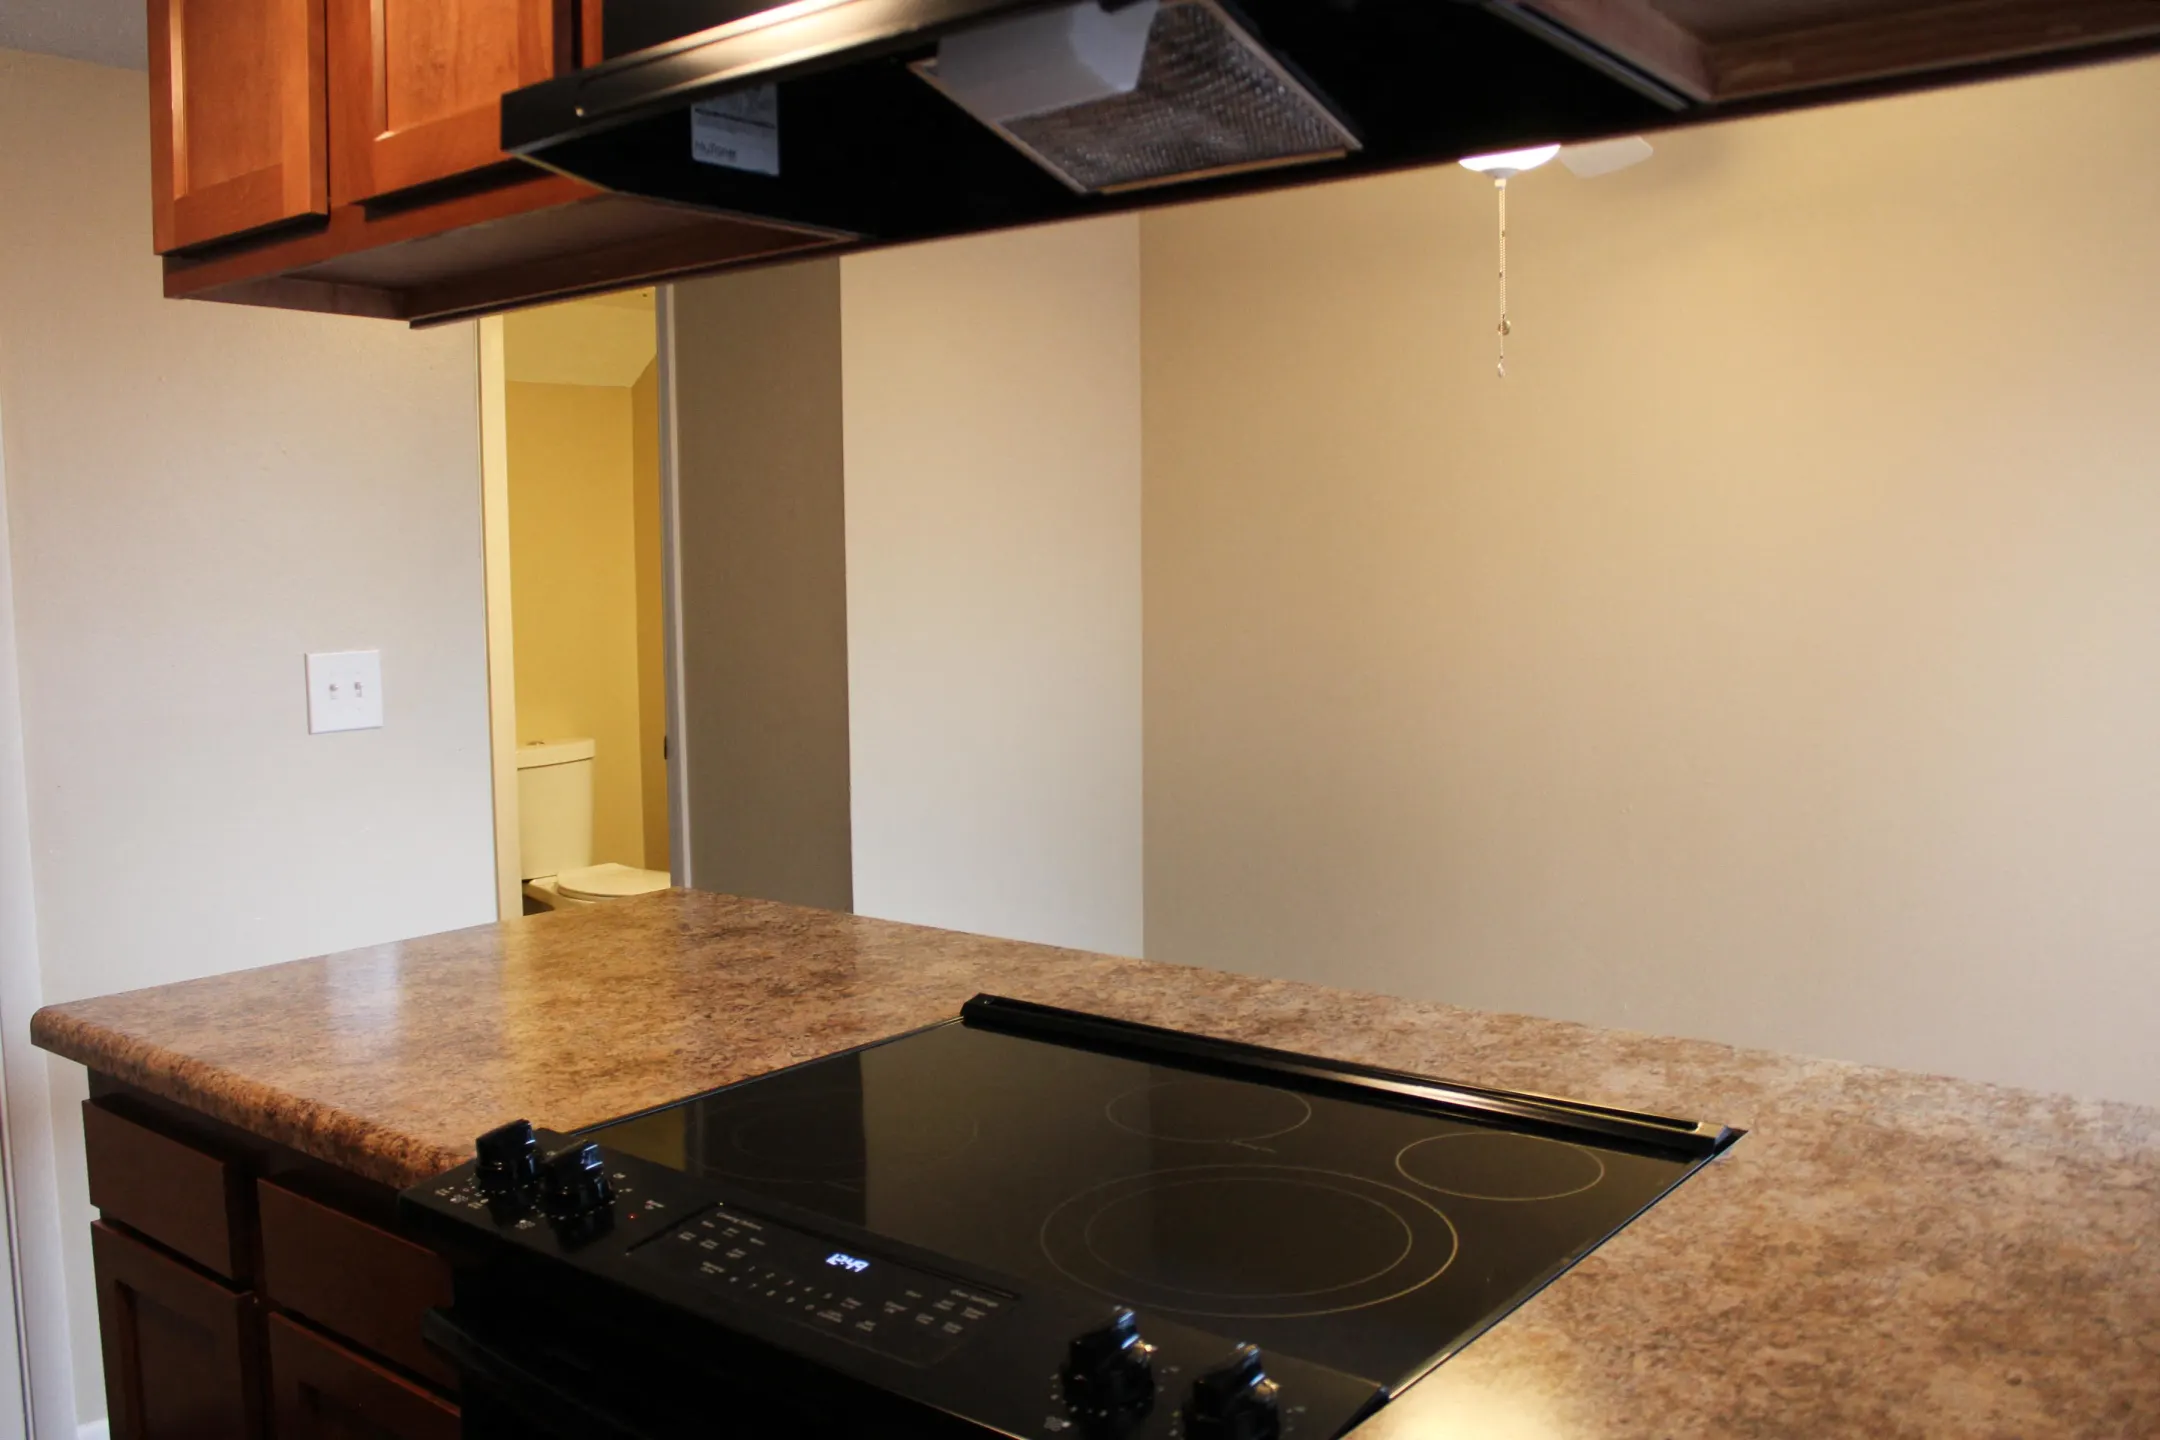 Kitchen - Miamisburg By The Mall - Miamisburg, OH